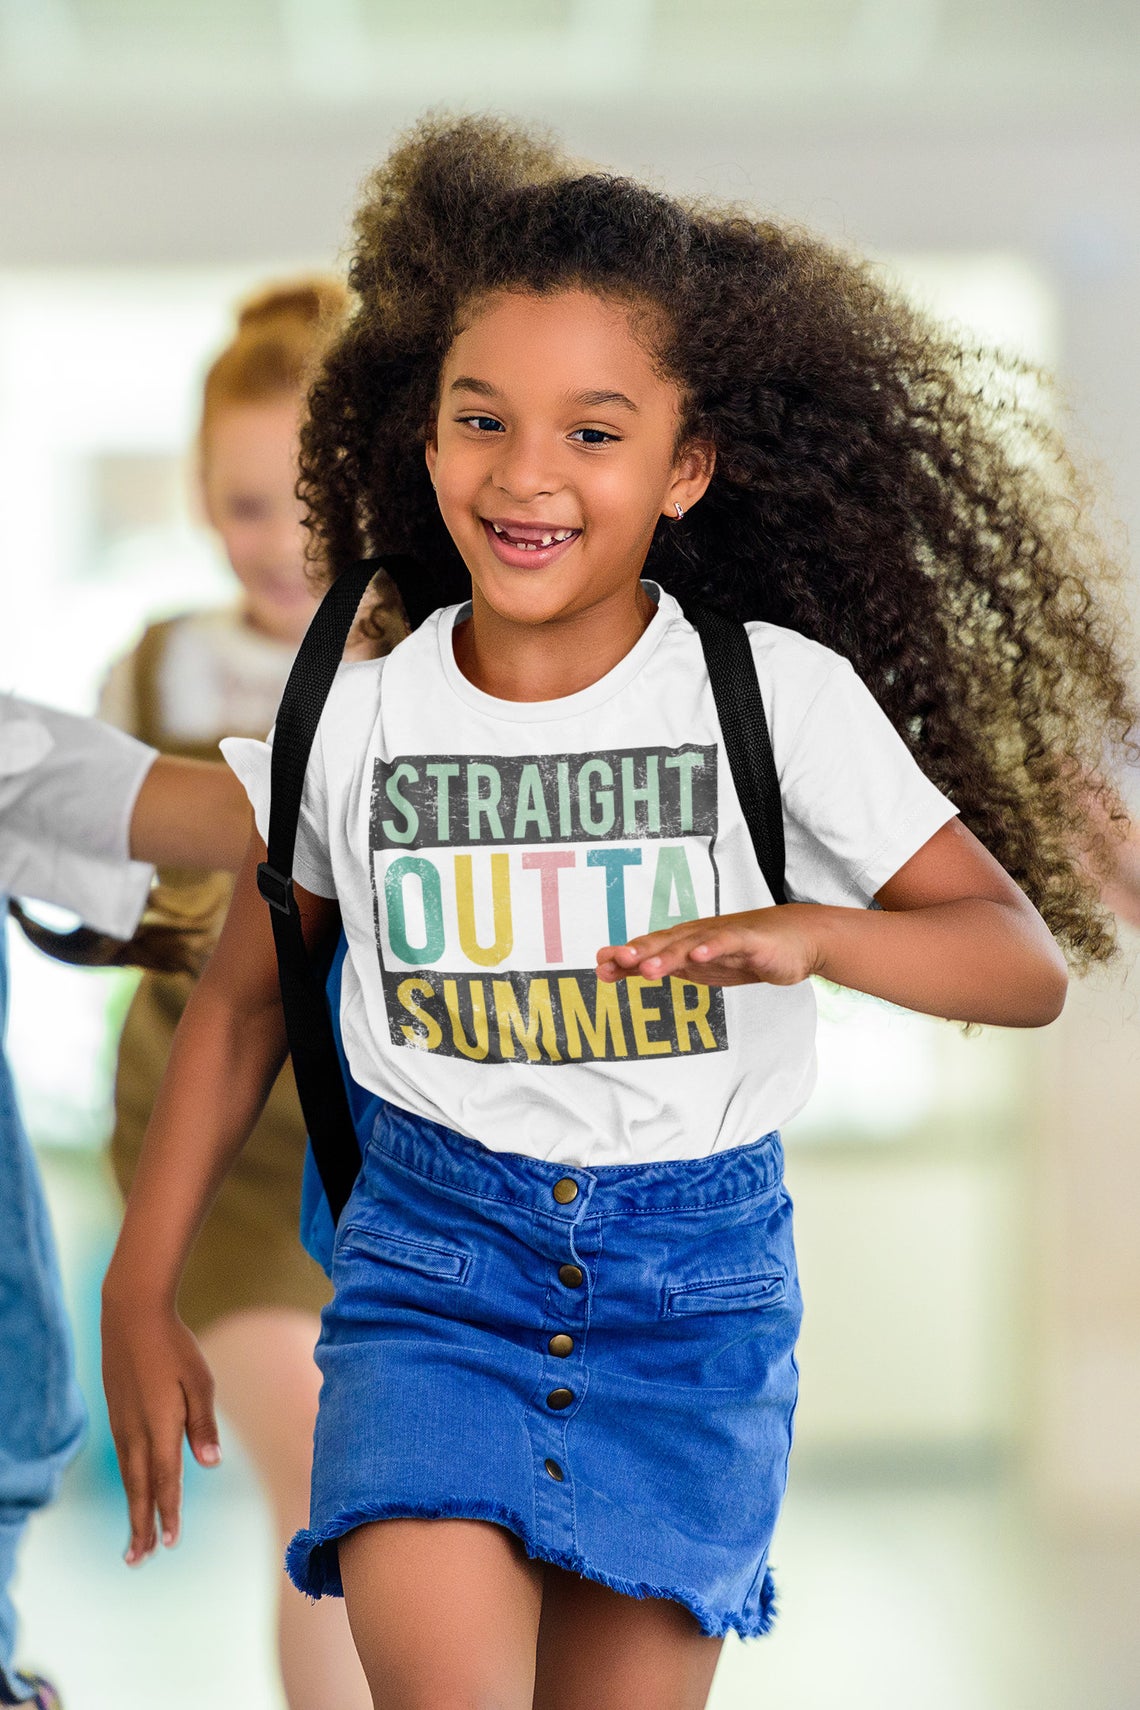 Straight Outta Summer Tee/ Youth and Adult Sizes Available/ Back To School Shirt